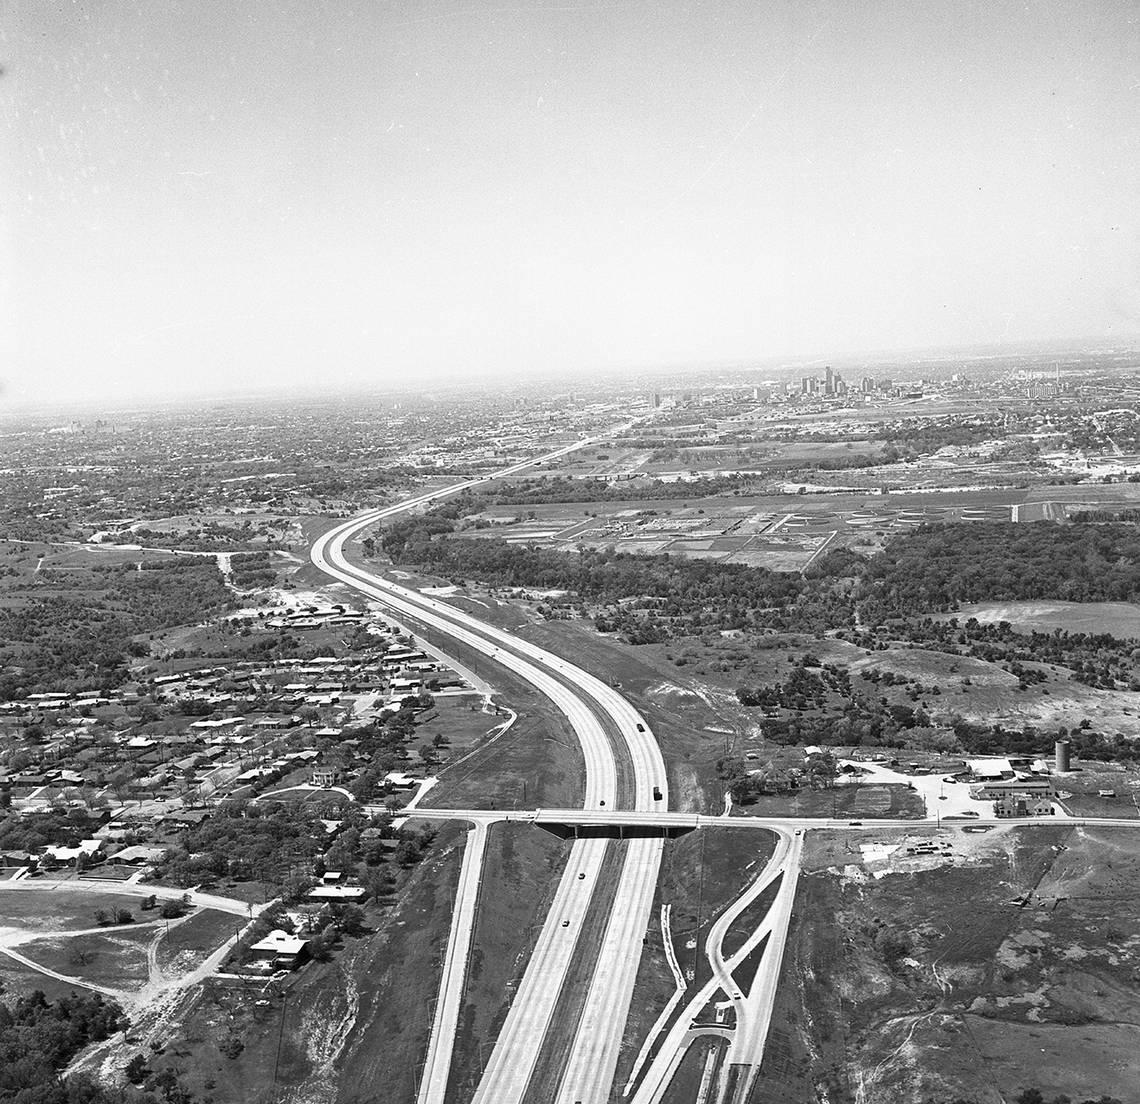 April 15, 1964: Superimposed on this aerial photo of the Fort Worth-Dallas Turnpike are new entrance and exit ramps to be constructed at Oakland Boulevard (foreground) and Beach Street (in the distance). The ramps made access easier to east Fort Worth without paying a 10-cent toll.